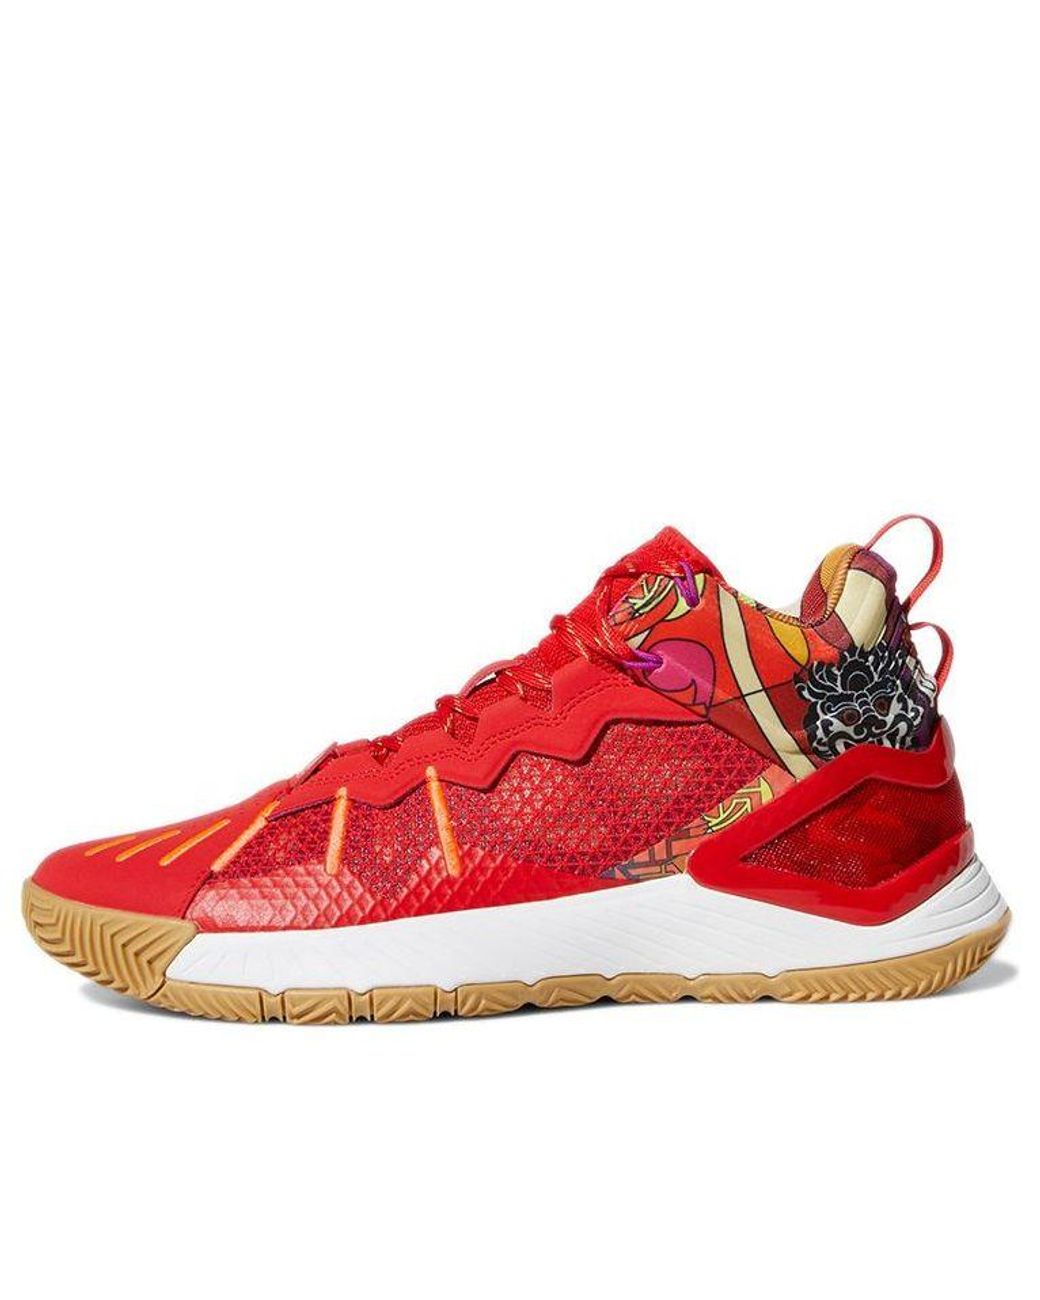 adidas x Derrick D Rose - Son of Chi - Men's Basketball Shoes Red